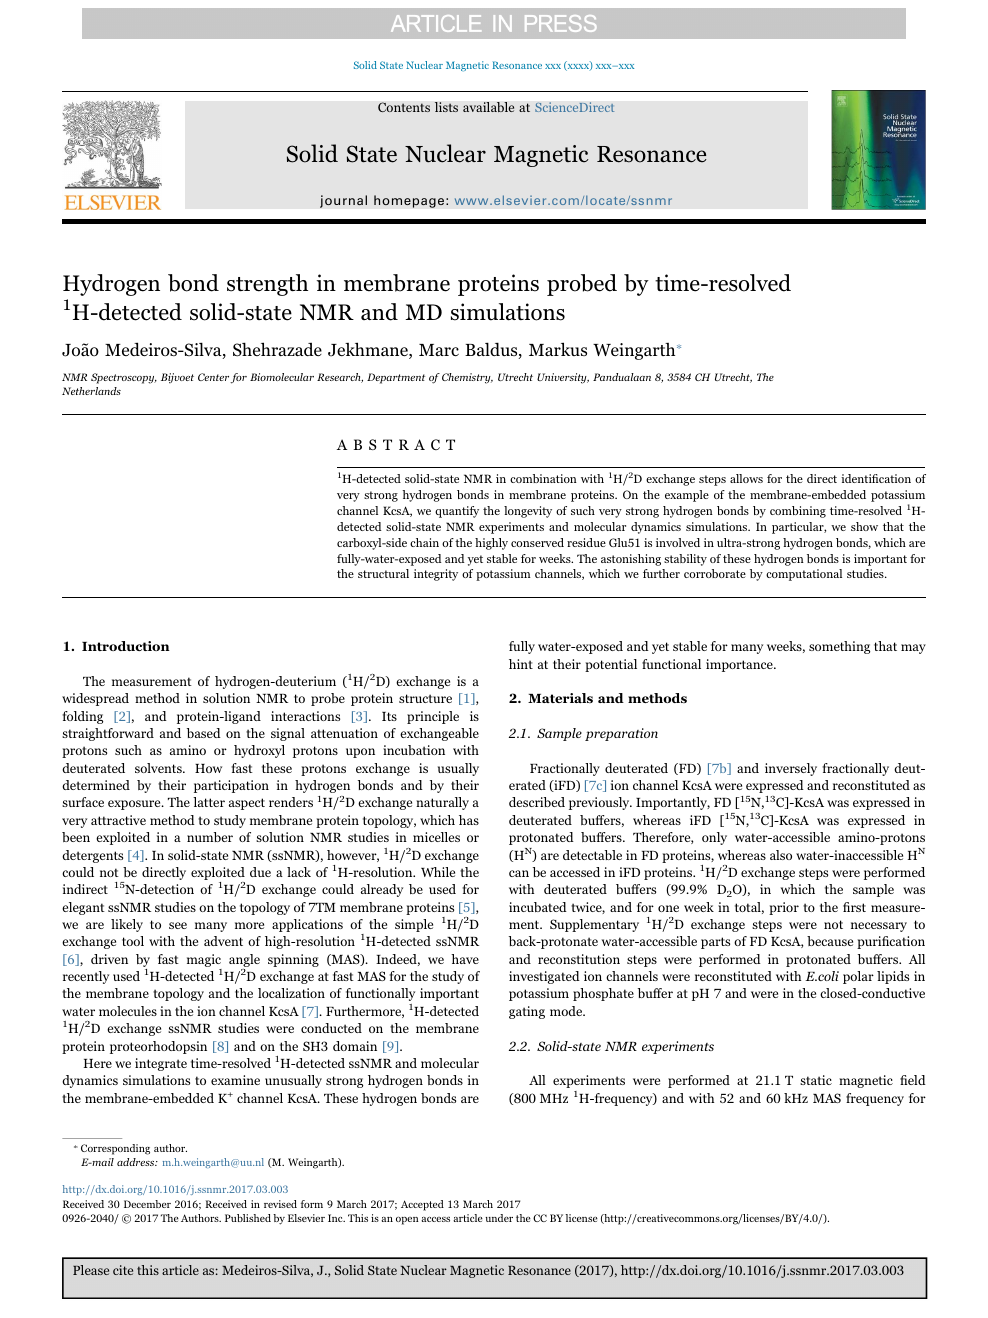 Hydrogen bond strength in membrane proteins probed by time-resolved 1 H-detected solid-state NMR and simulations – topic of research paper in Chemical sciences. scholarly article PDF and read for free